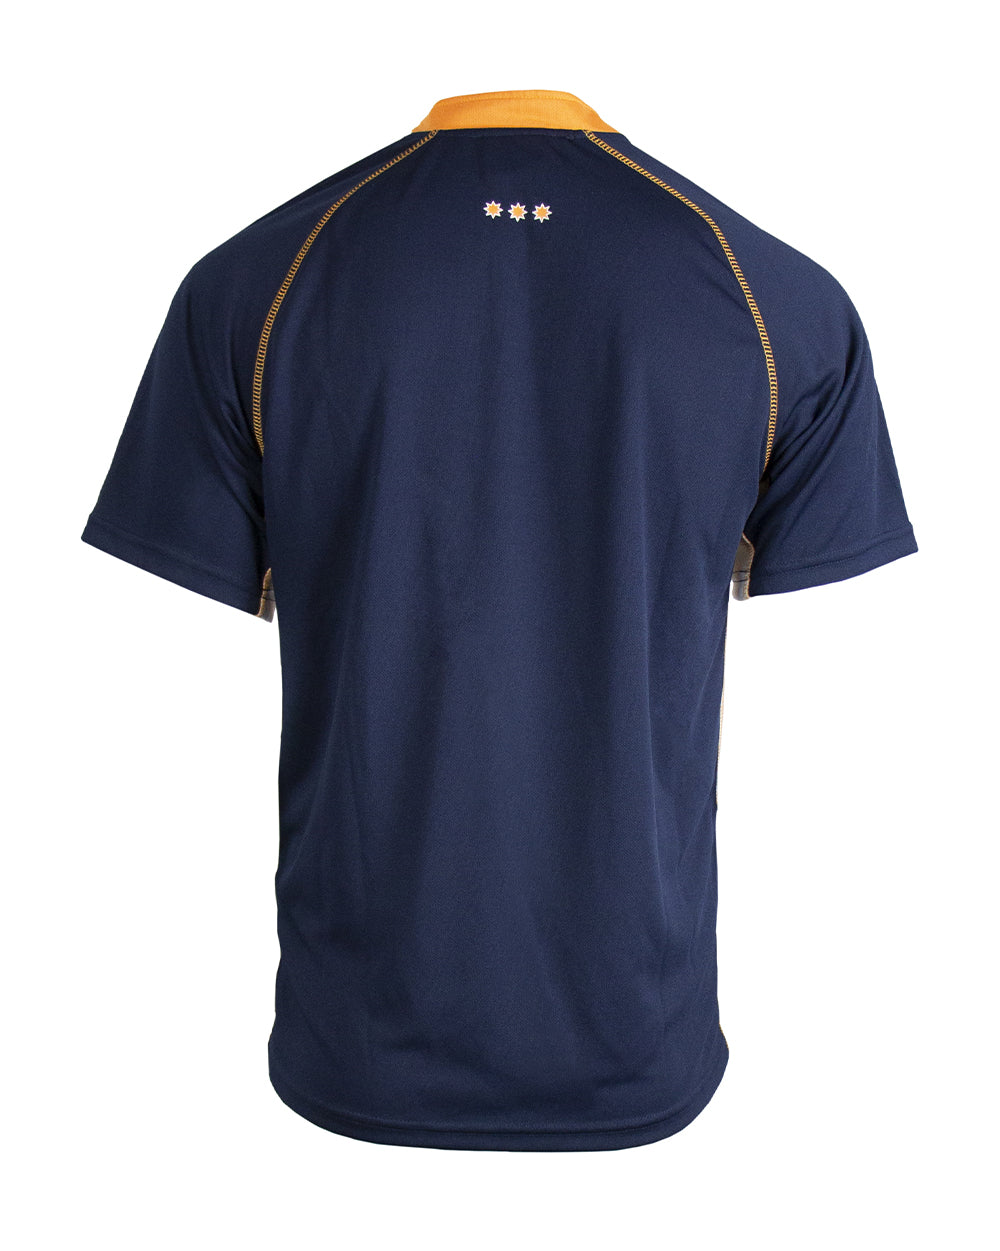 Speight's Rugby Jersey -  Beer Gear Apparel & Merchandise - Speights - Lion Red - VB - Tokyo Dy merch